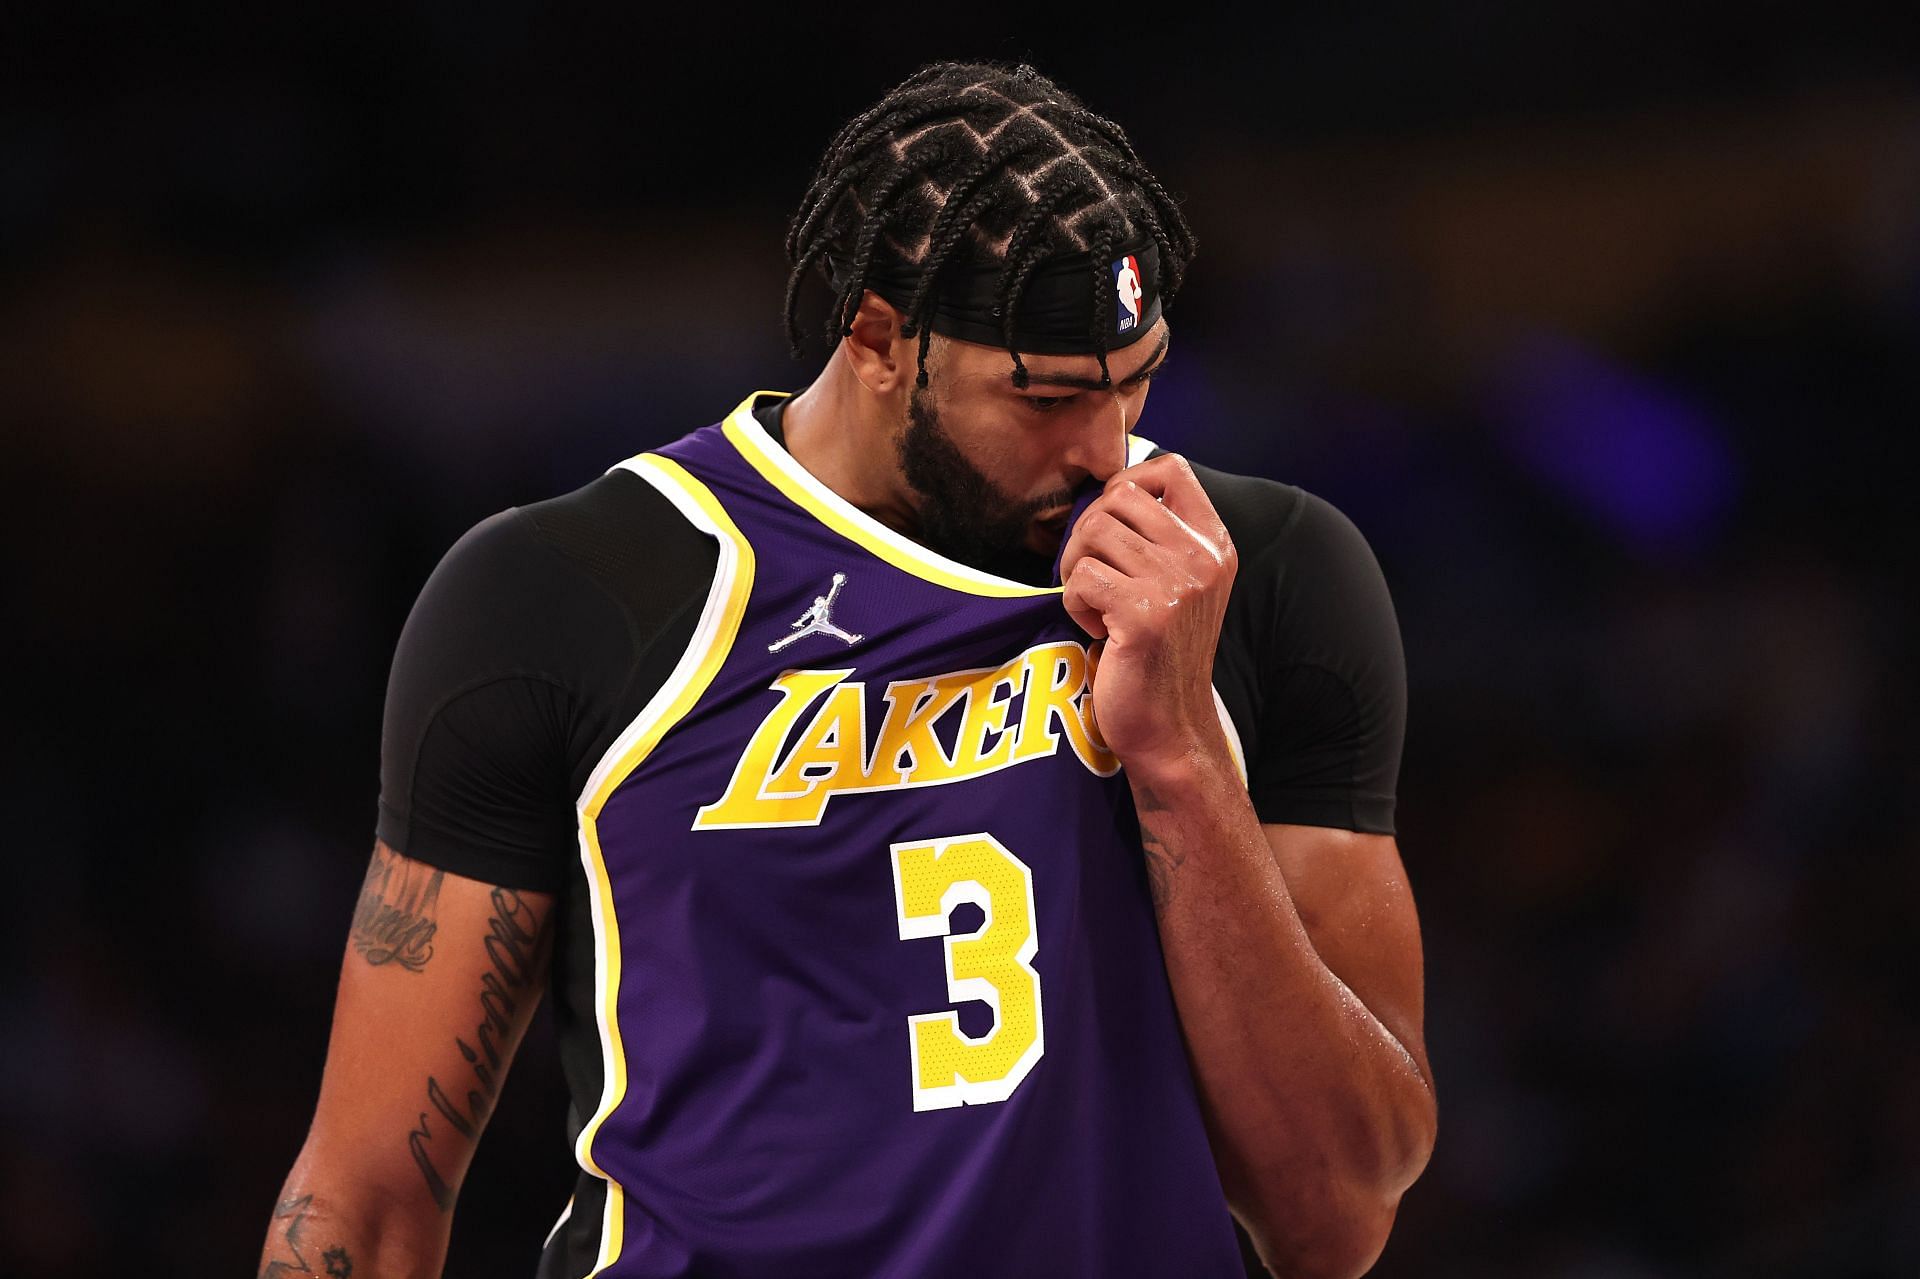 Anthony Davis said the Lakers &quot;sucked&quot; in their 24-point loss to the Minnesota Timberwolves on Friday